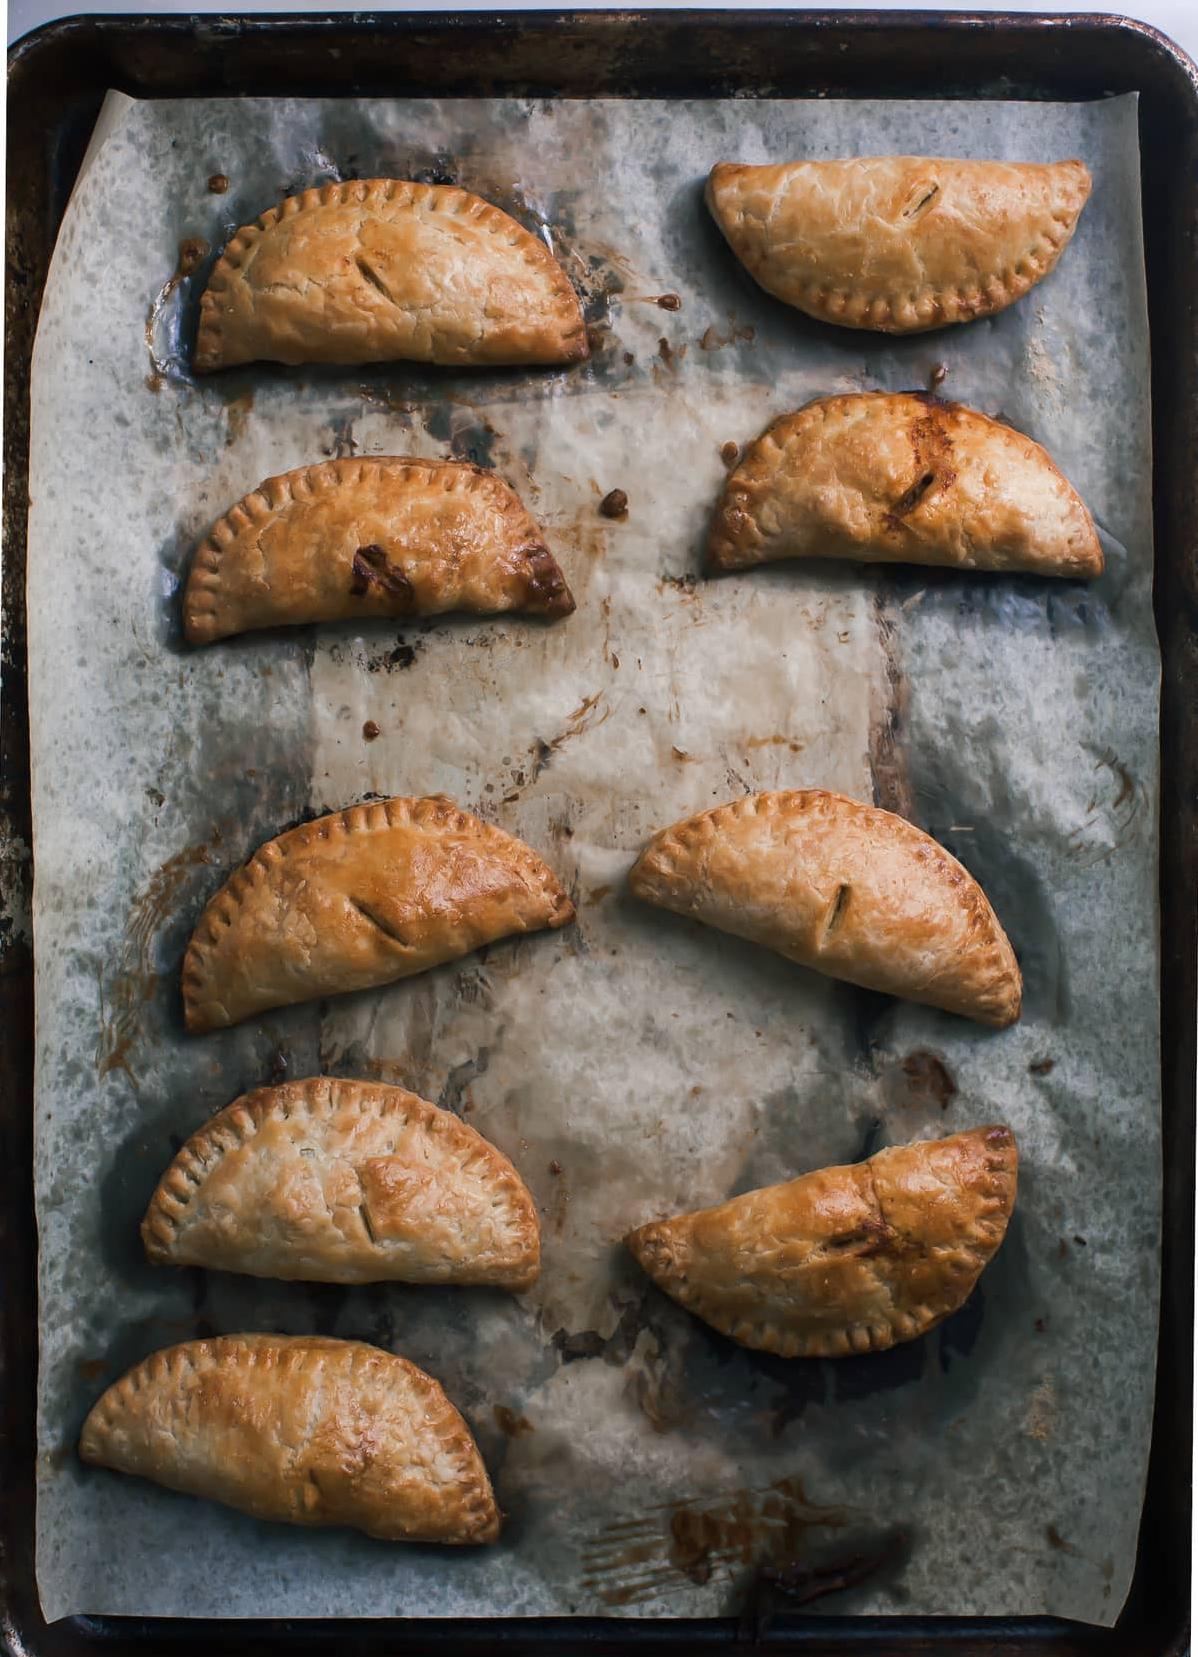  Filled with a delicious blend of meat, cheese, vegetables, and spices, these empanadas are sure to satisfy.